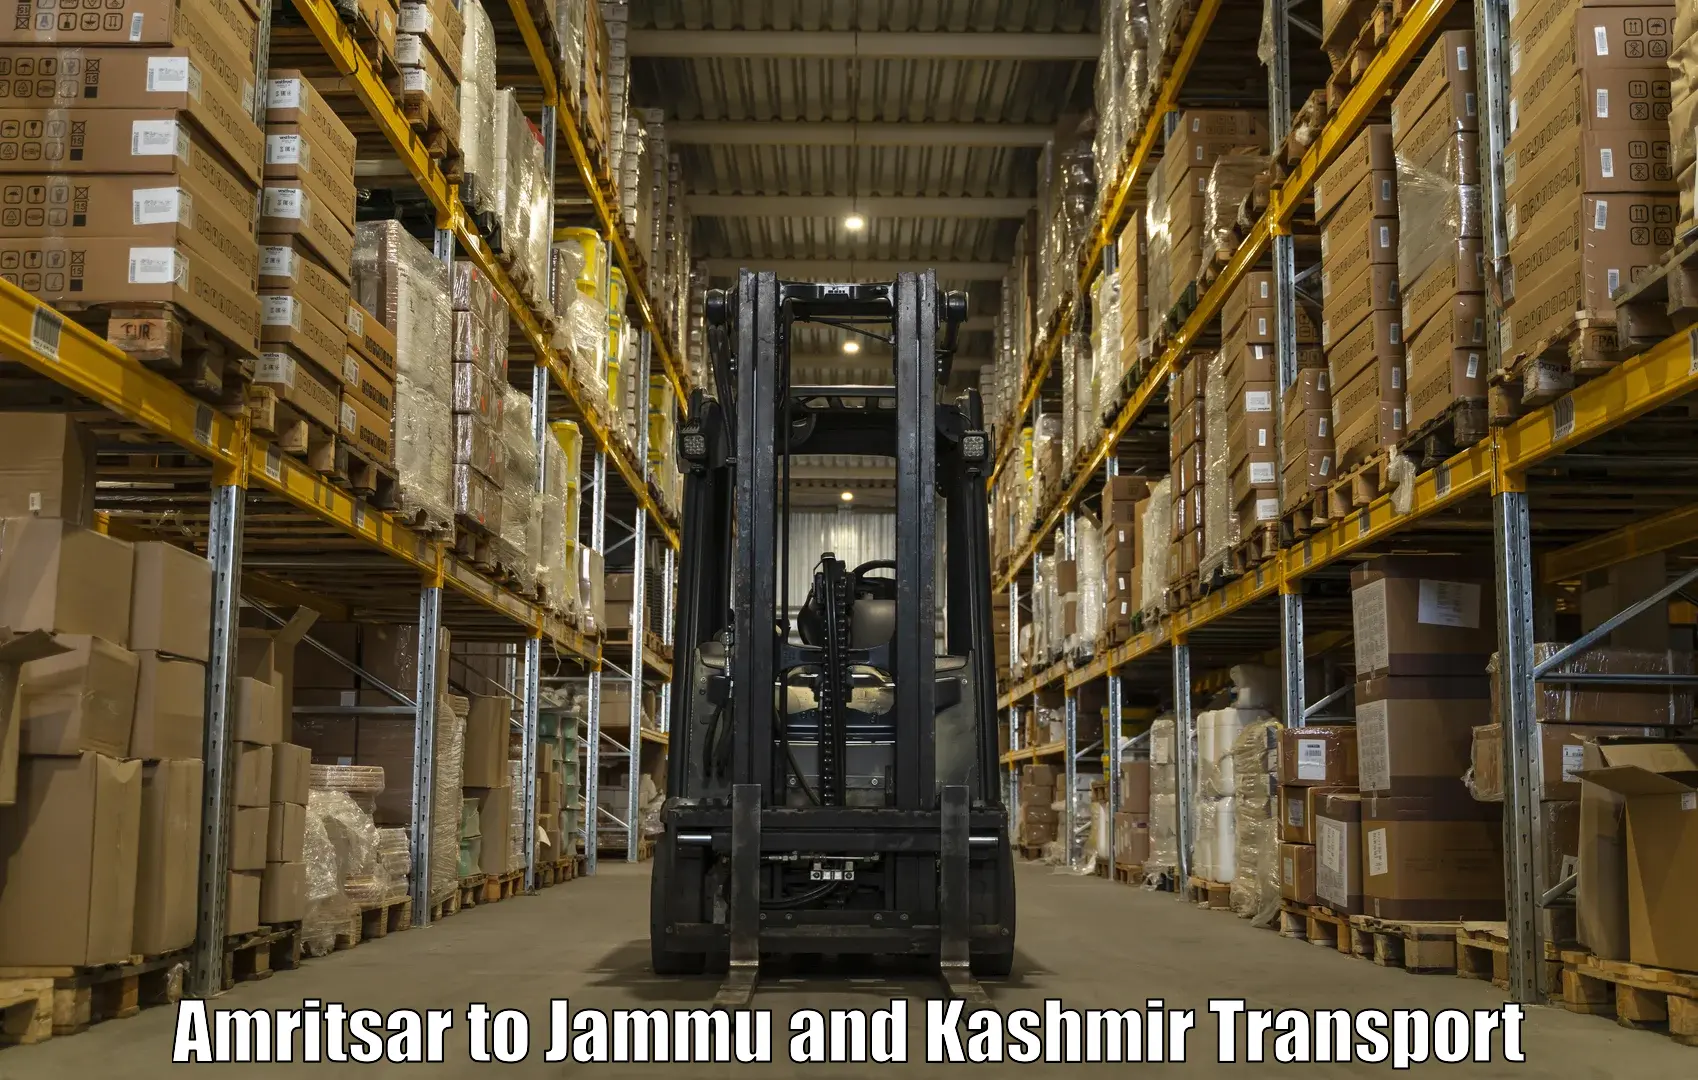 Air freight transport services Amritsar to Jammu